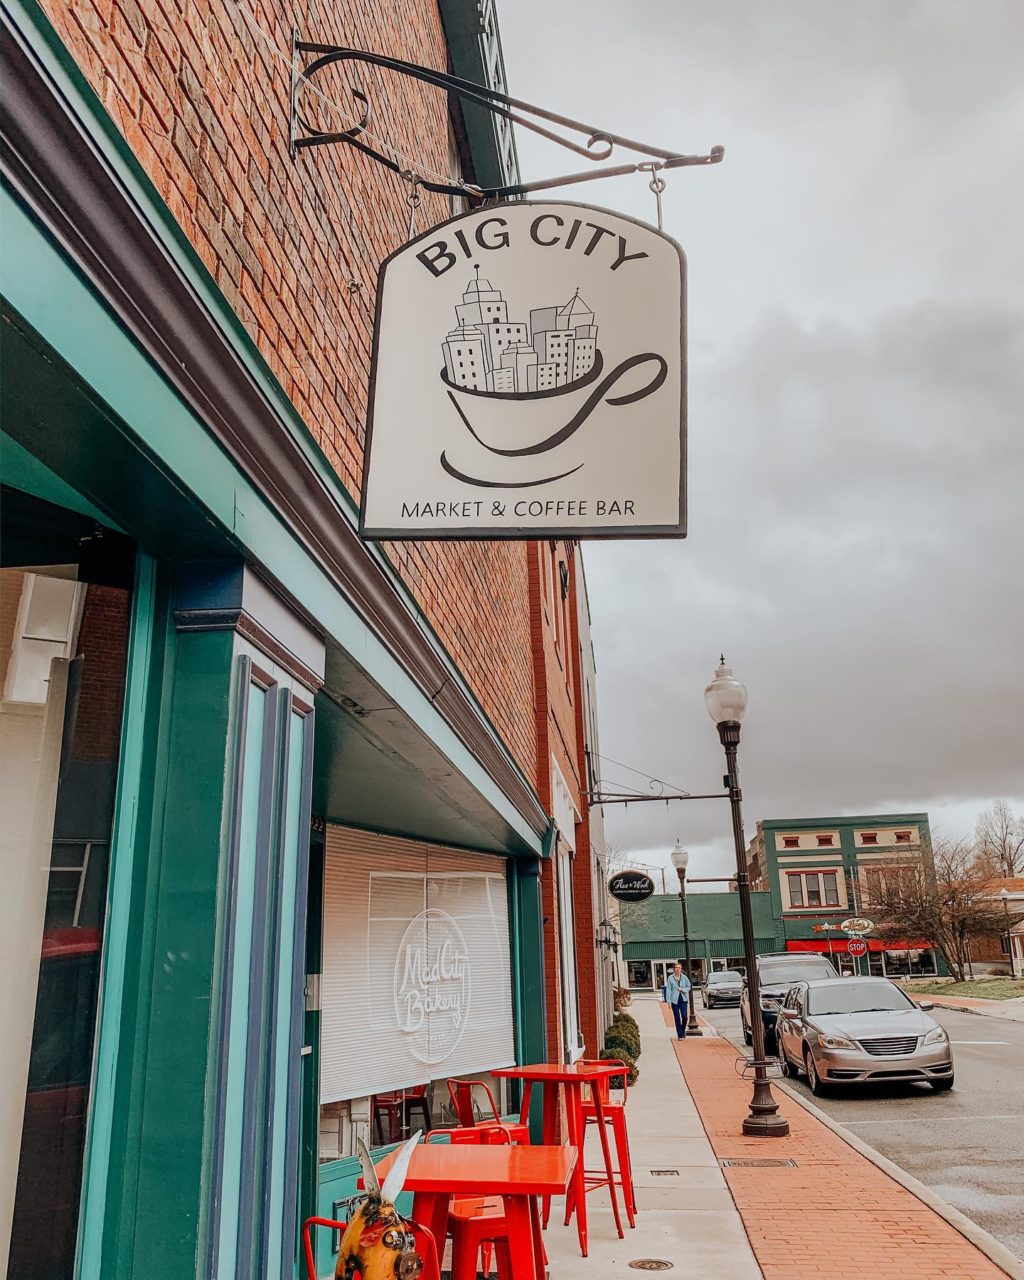 Big City Market + Coffee Bar entrance on Sugg St in Madisonville